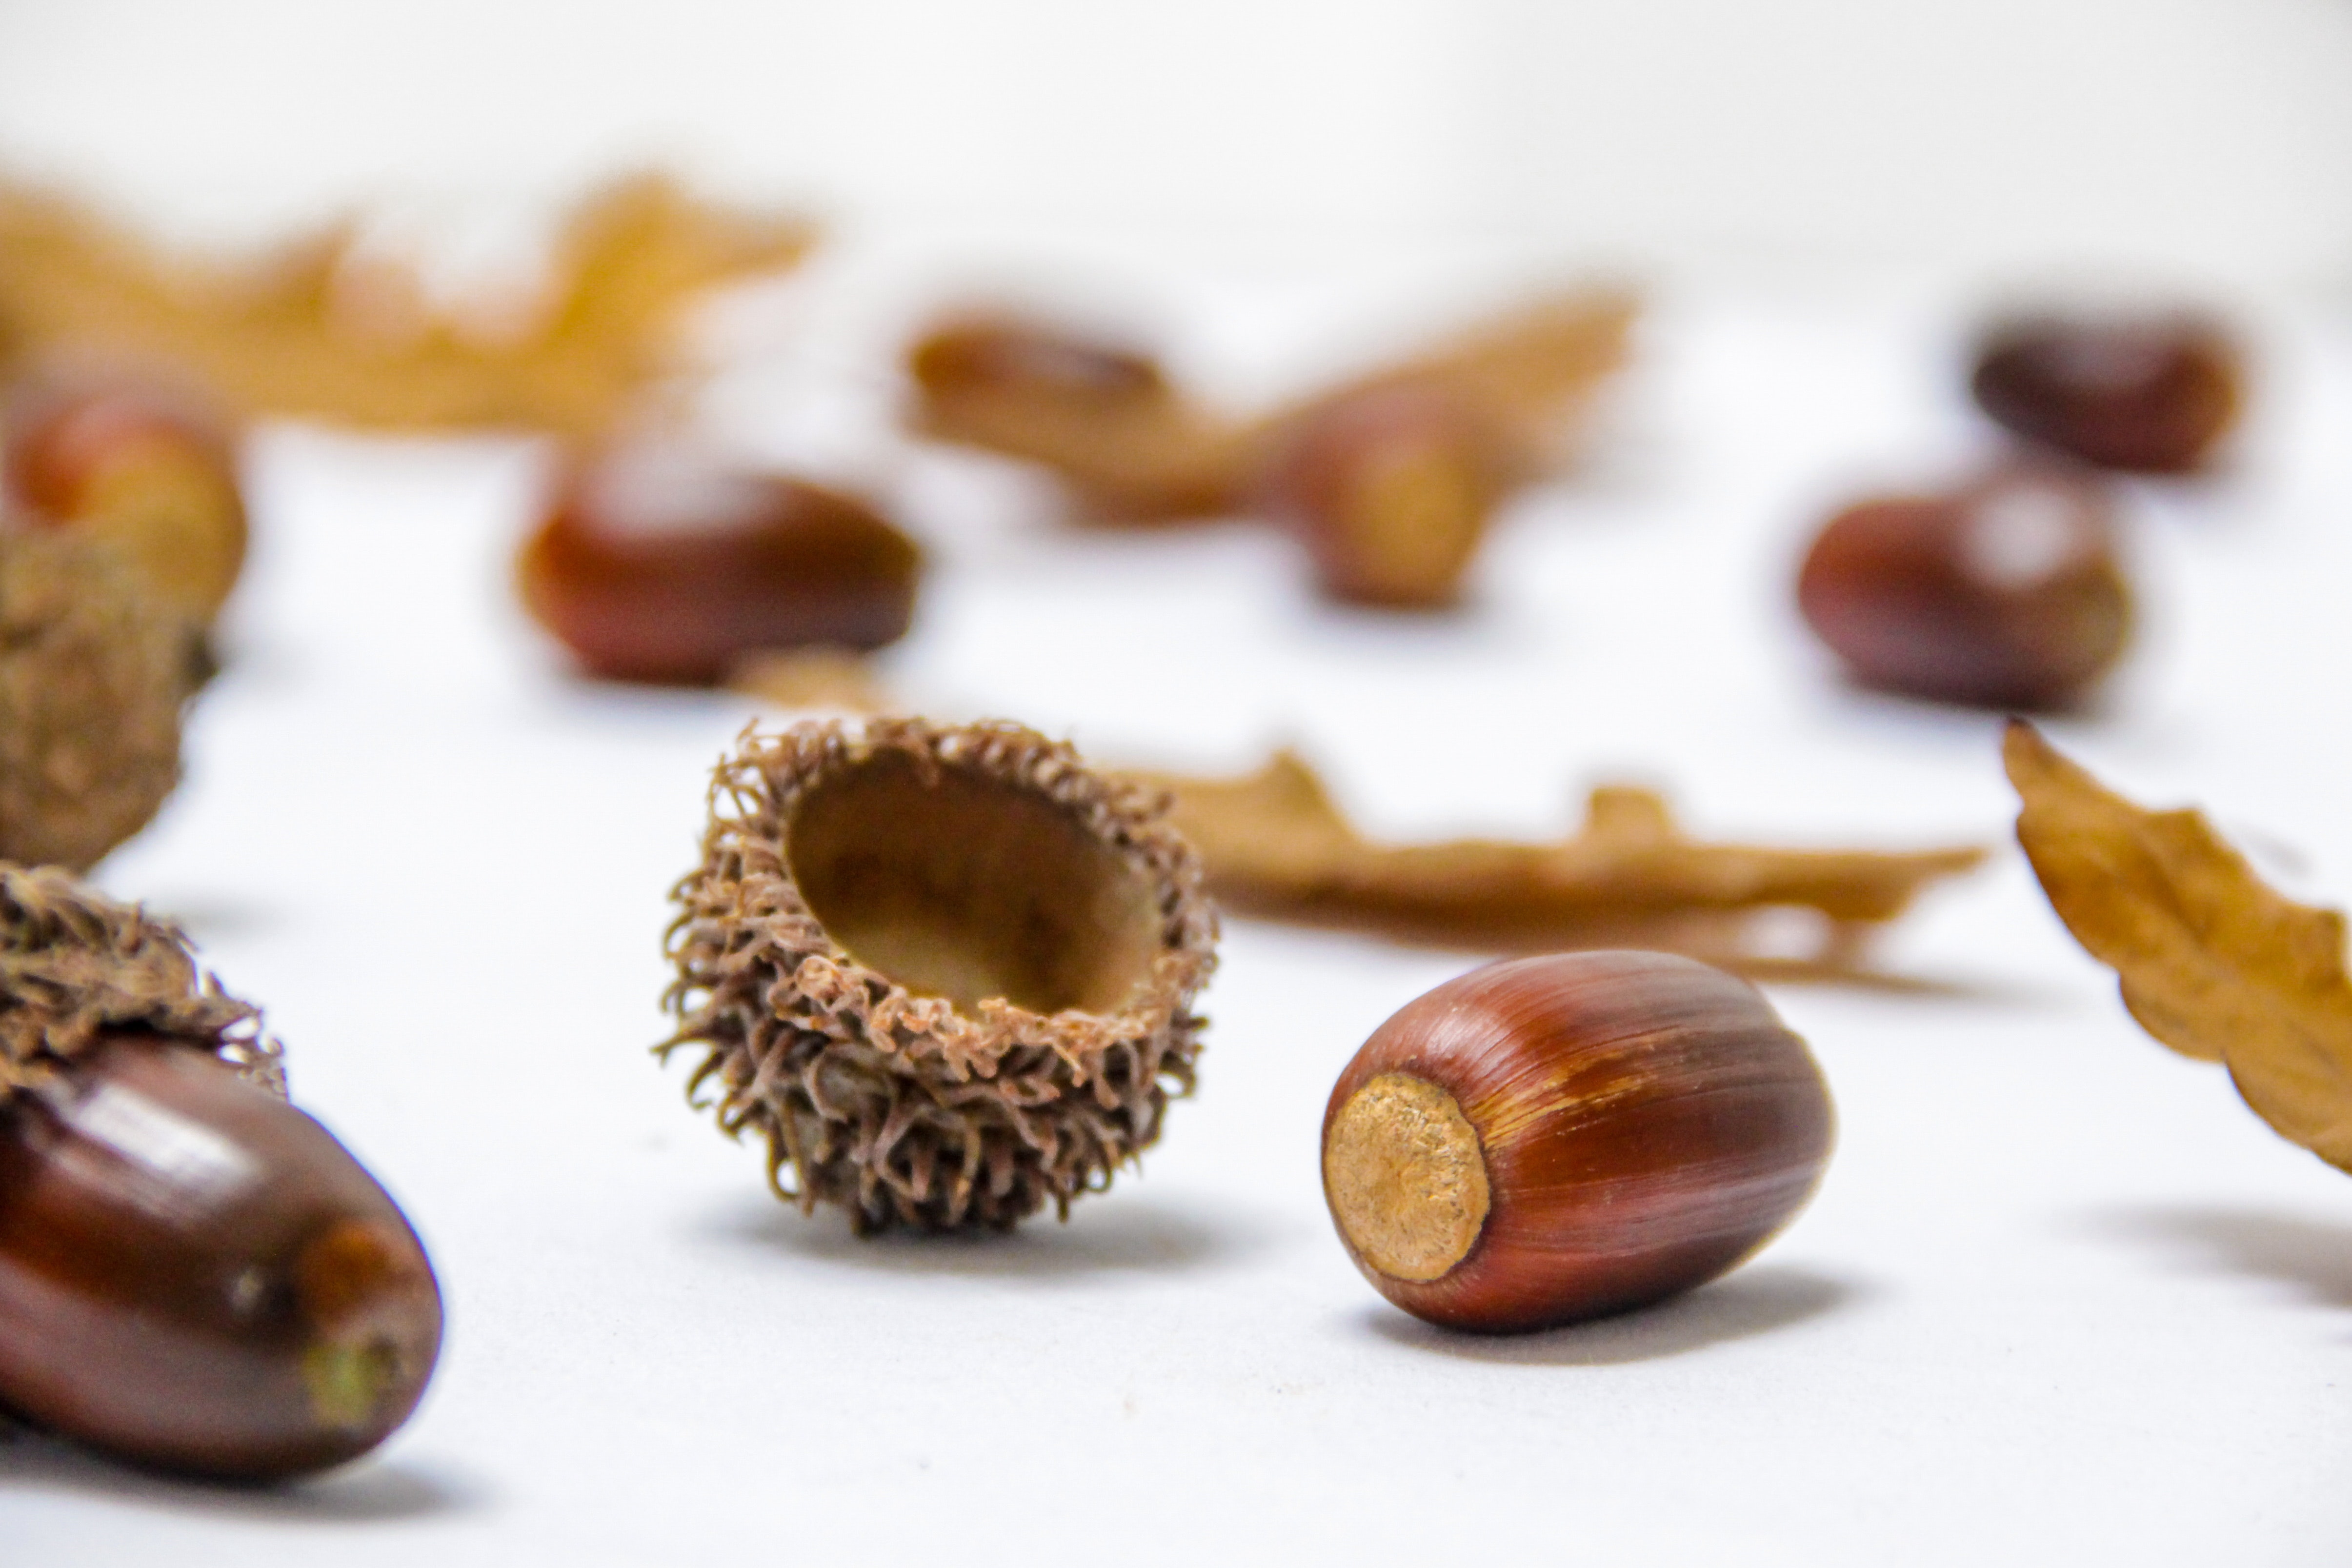 Close-up of Nut shell, Refreshment, Wood, Traditional, Tasty, HQ Photo